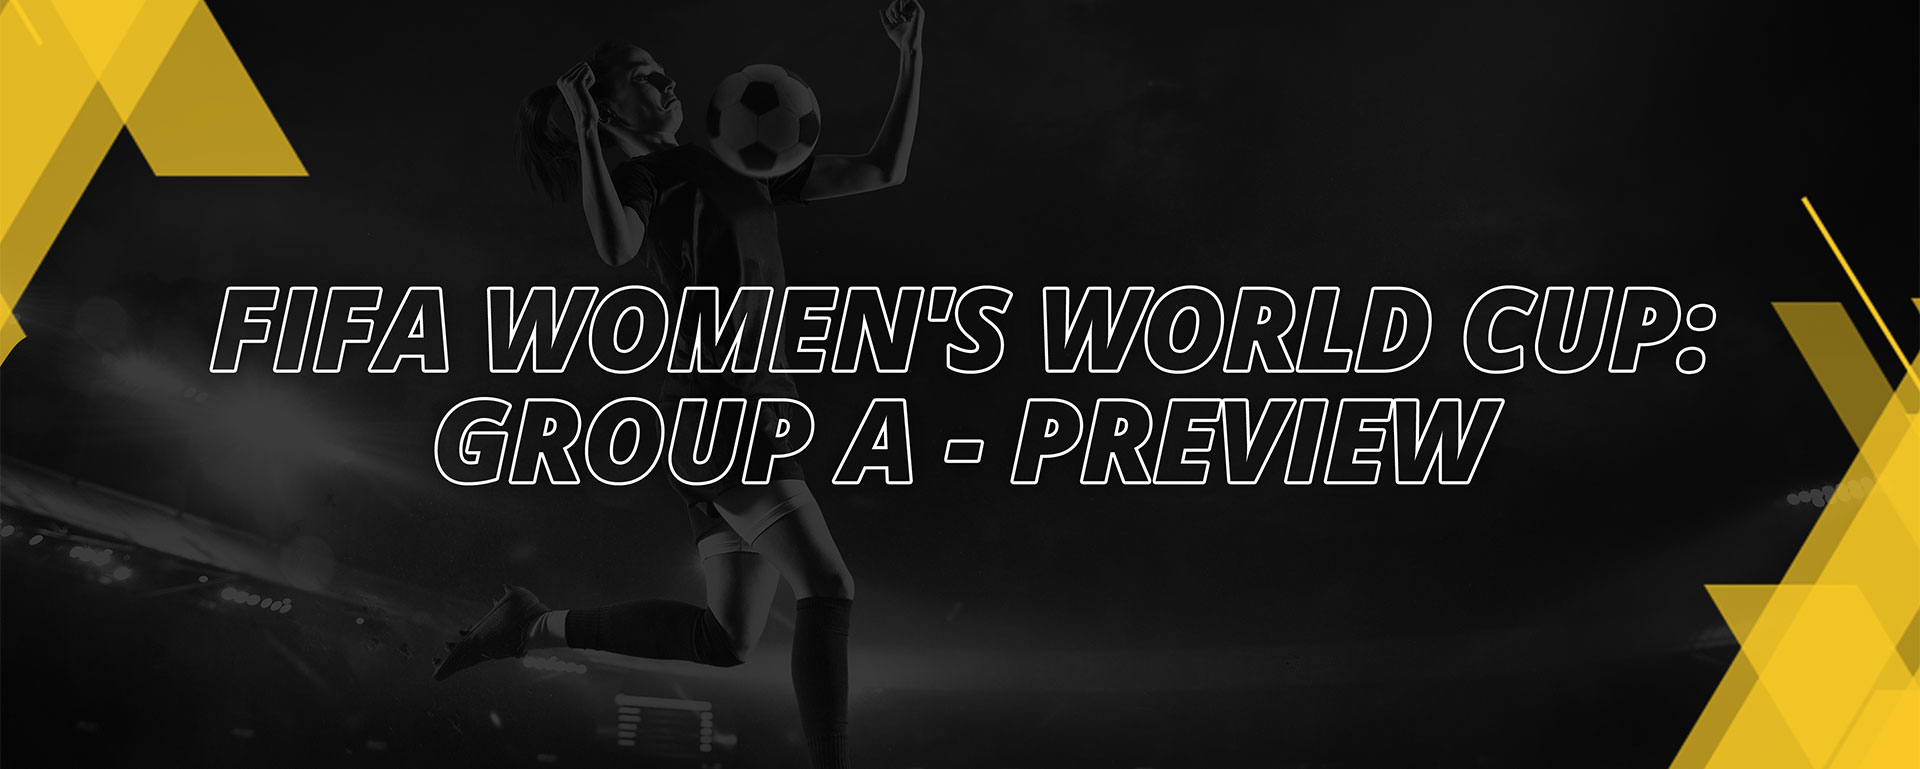 WOMEN’S FIFA WORLD CUP 2023 – GROUP A PREVIEW